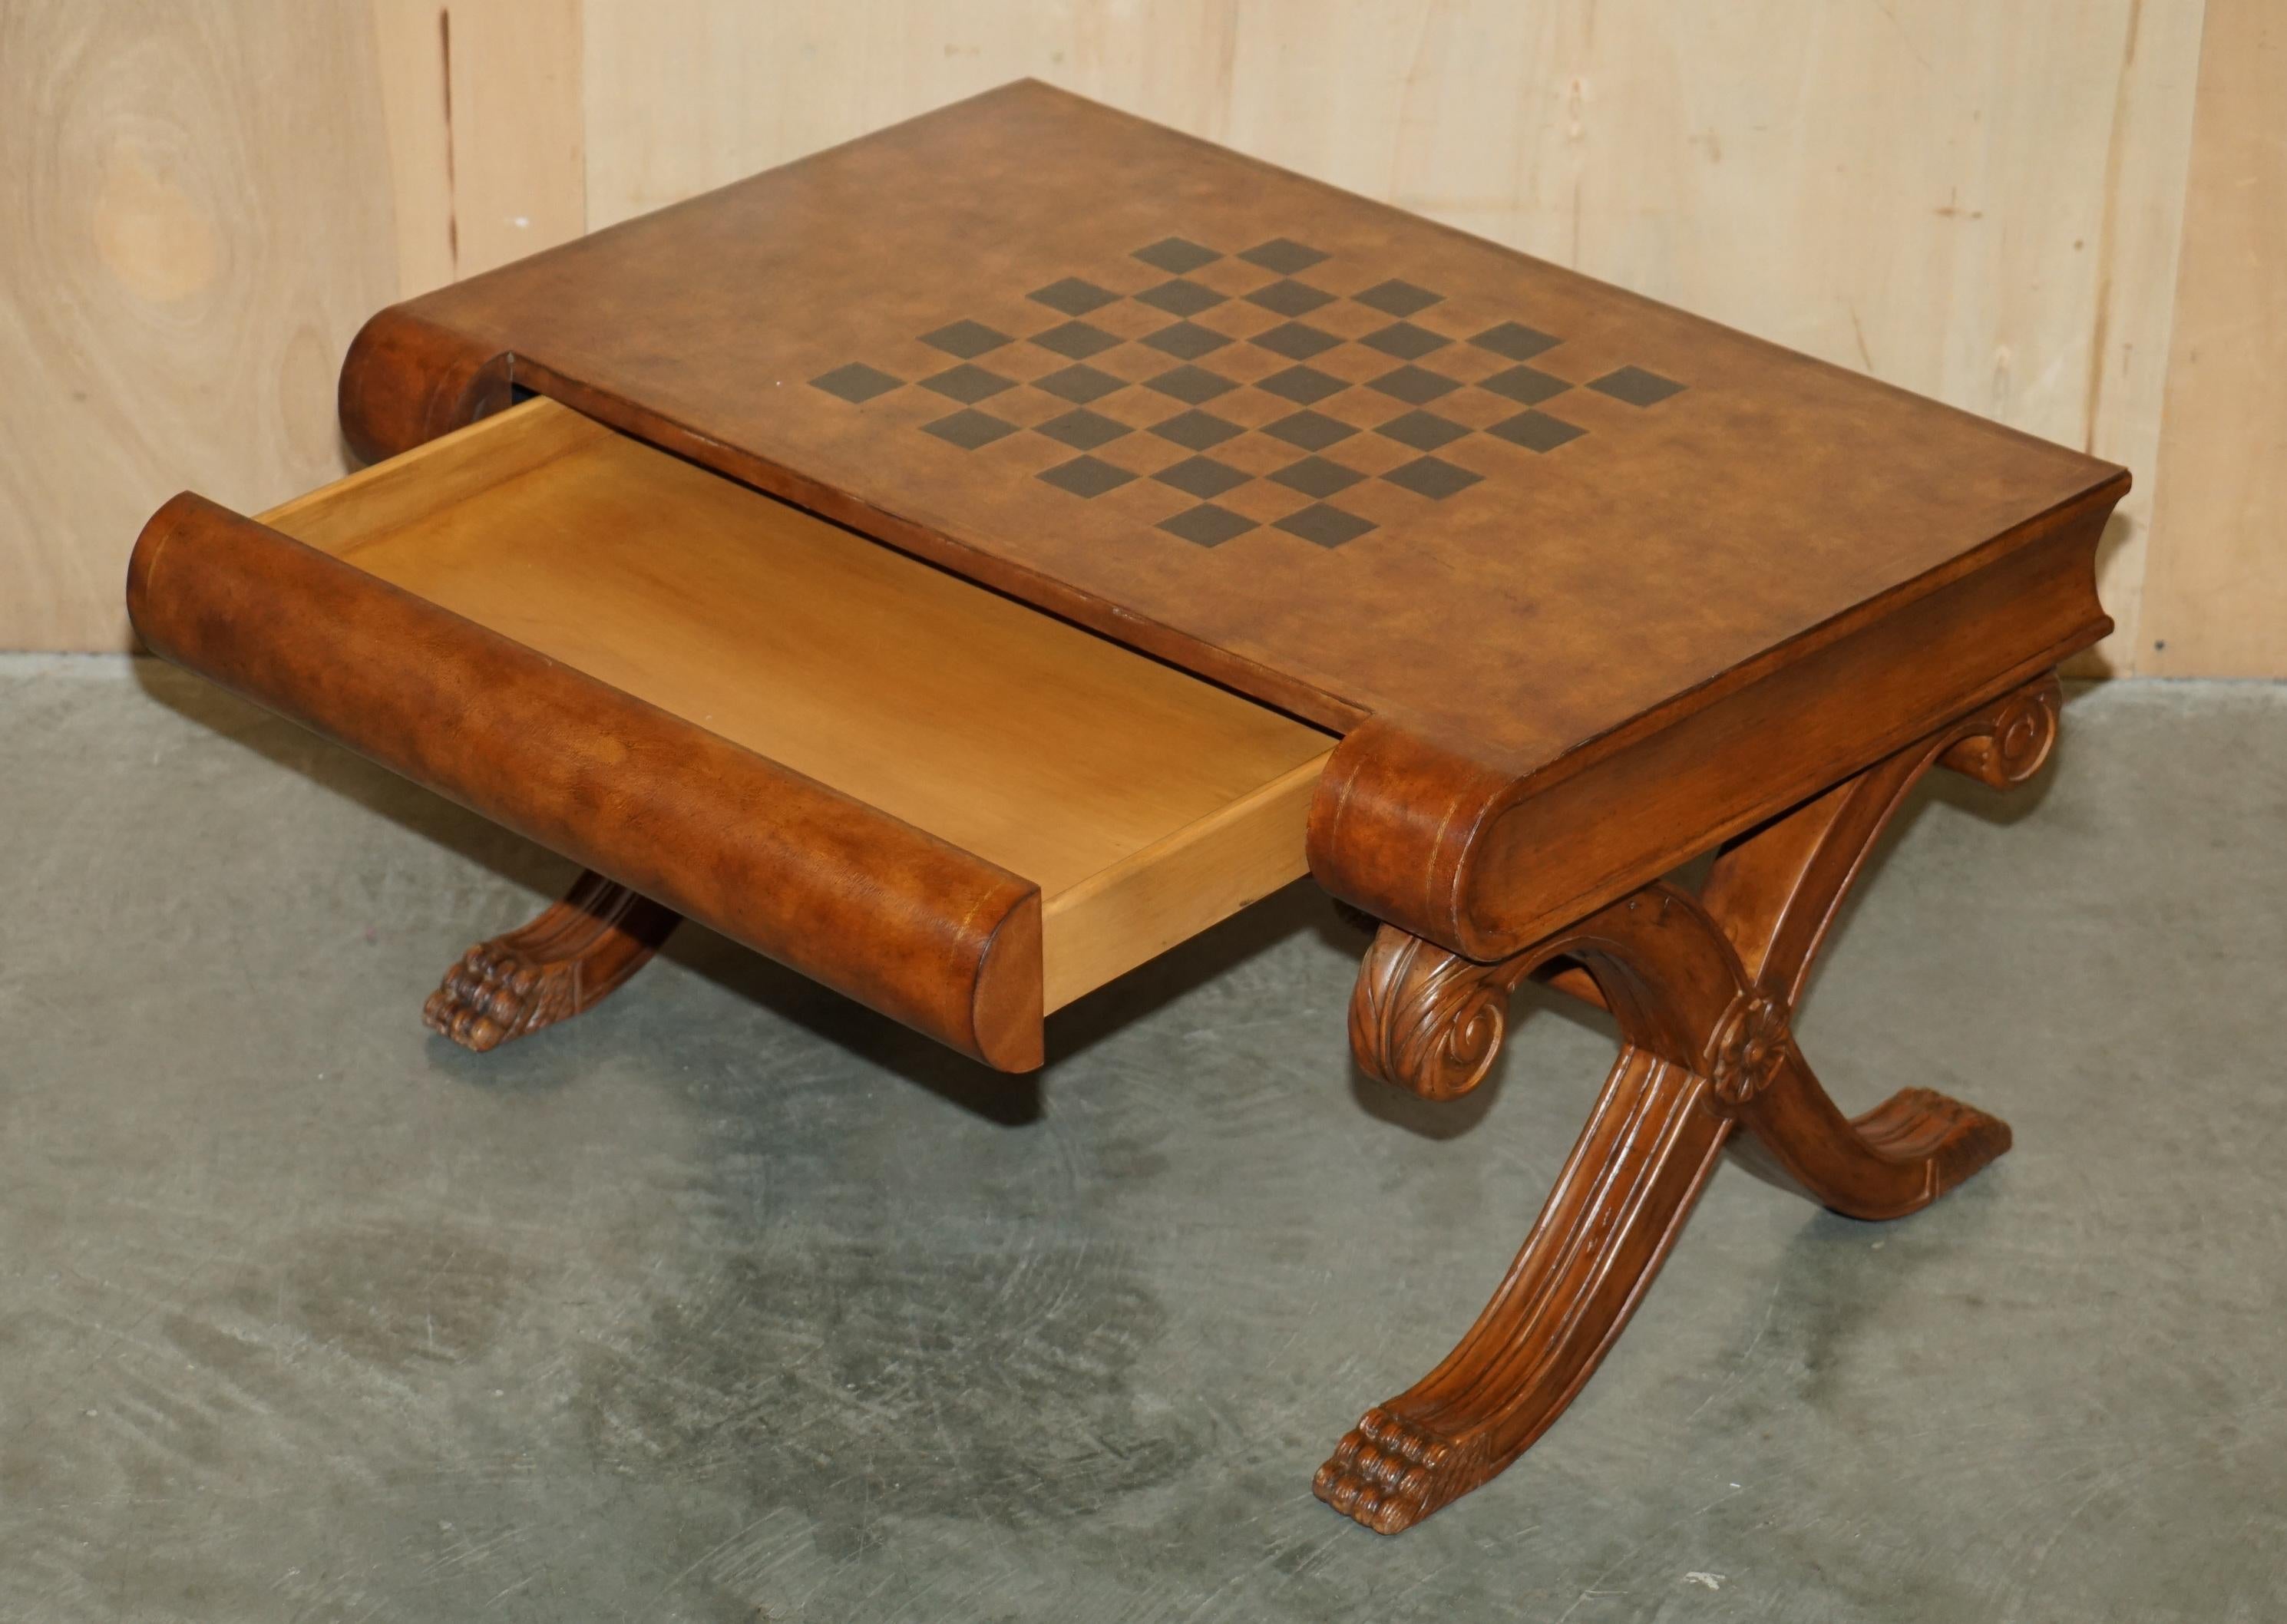 STUNNiNG HANDDYED BROWN LEATHER SCHOLARS BOOK CHESSBOARD CHESS COFFEE TABLE im Angebot 8